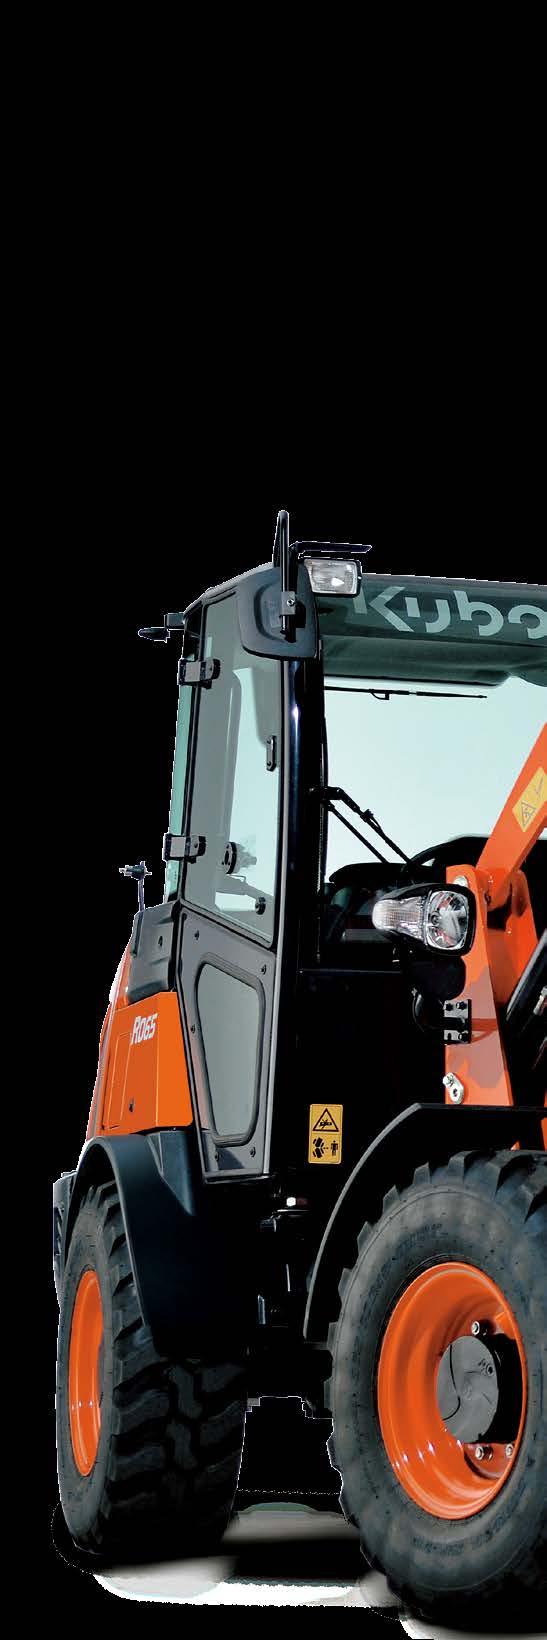 From Kubota, the well-known mini excavator brand, comes a new wheel loader designed get the